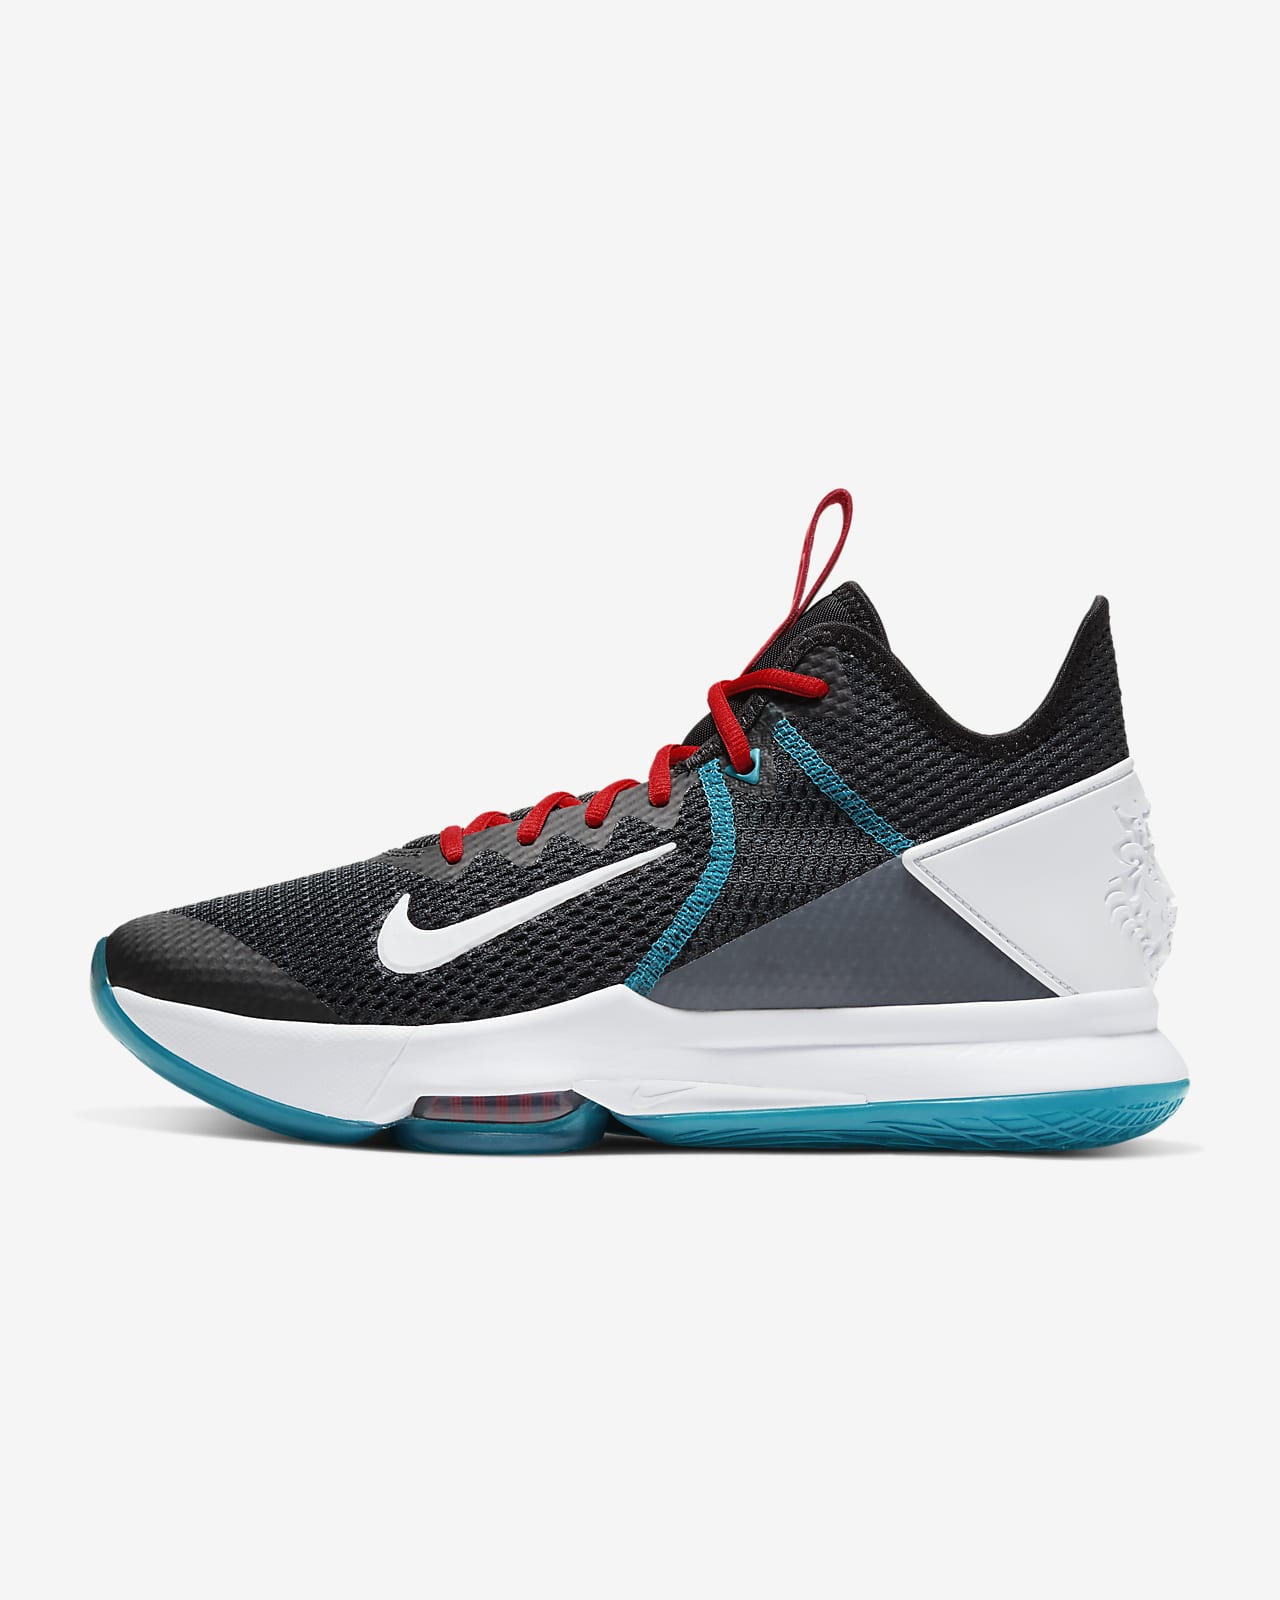 lebron witness 4 colors